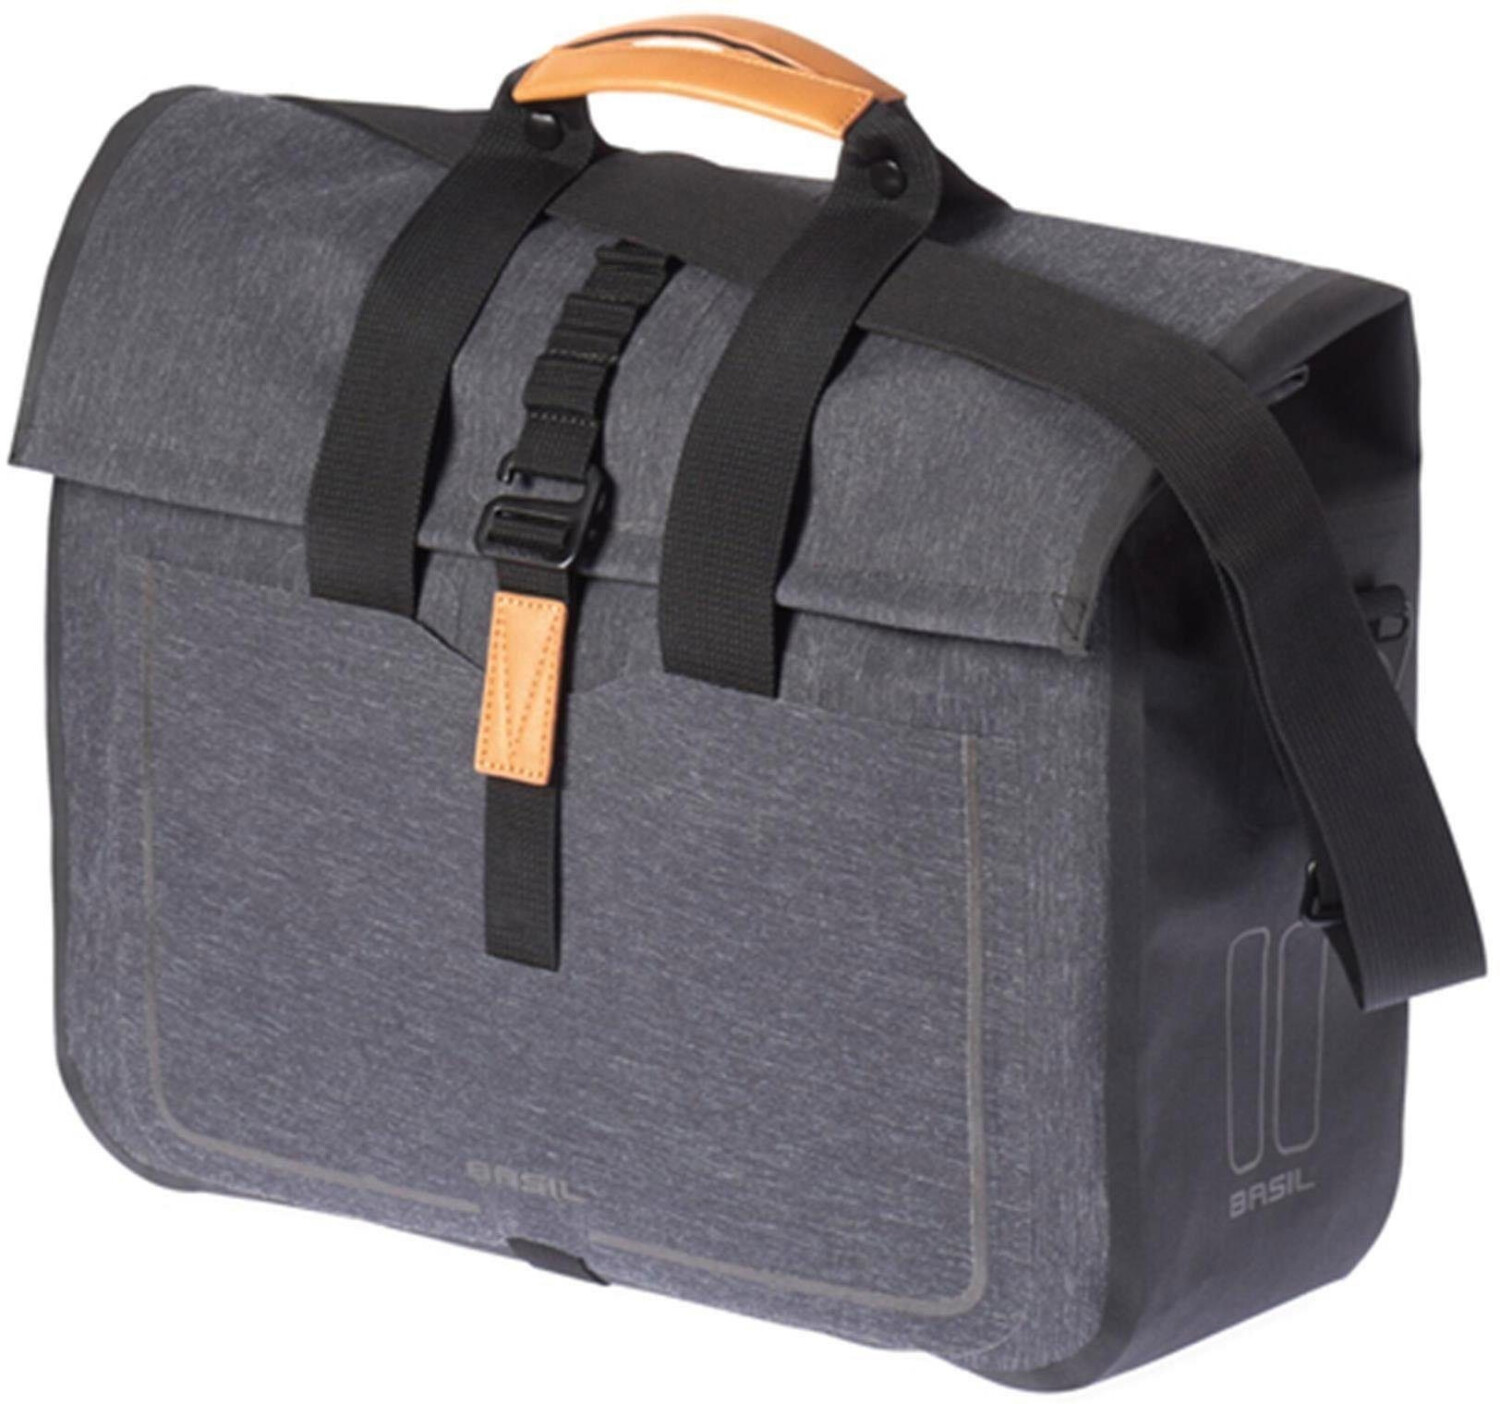 Buy Basil Urban Dry Business Bag from £55.99 (Today) – Best Deals on ...